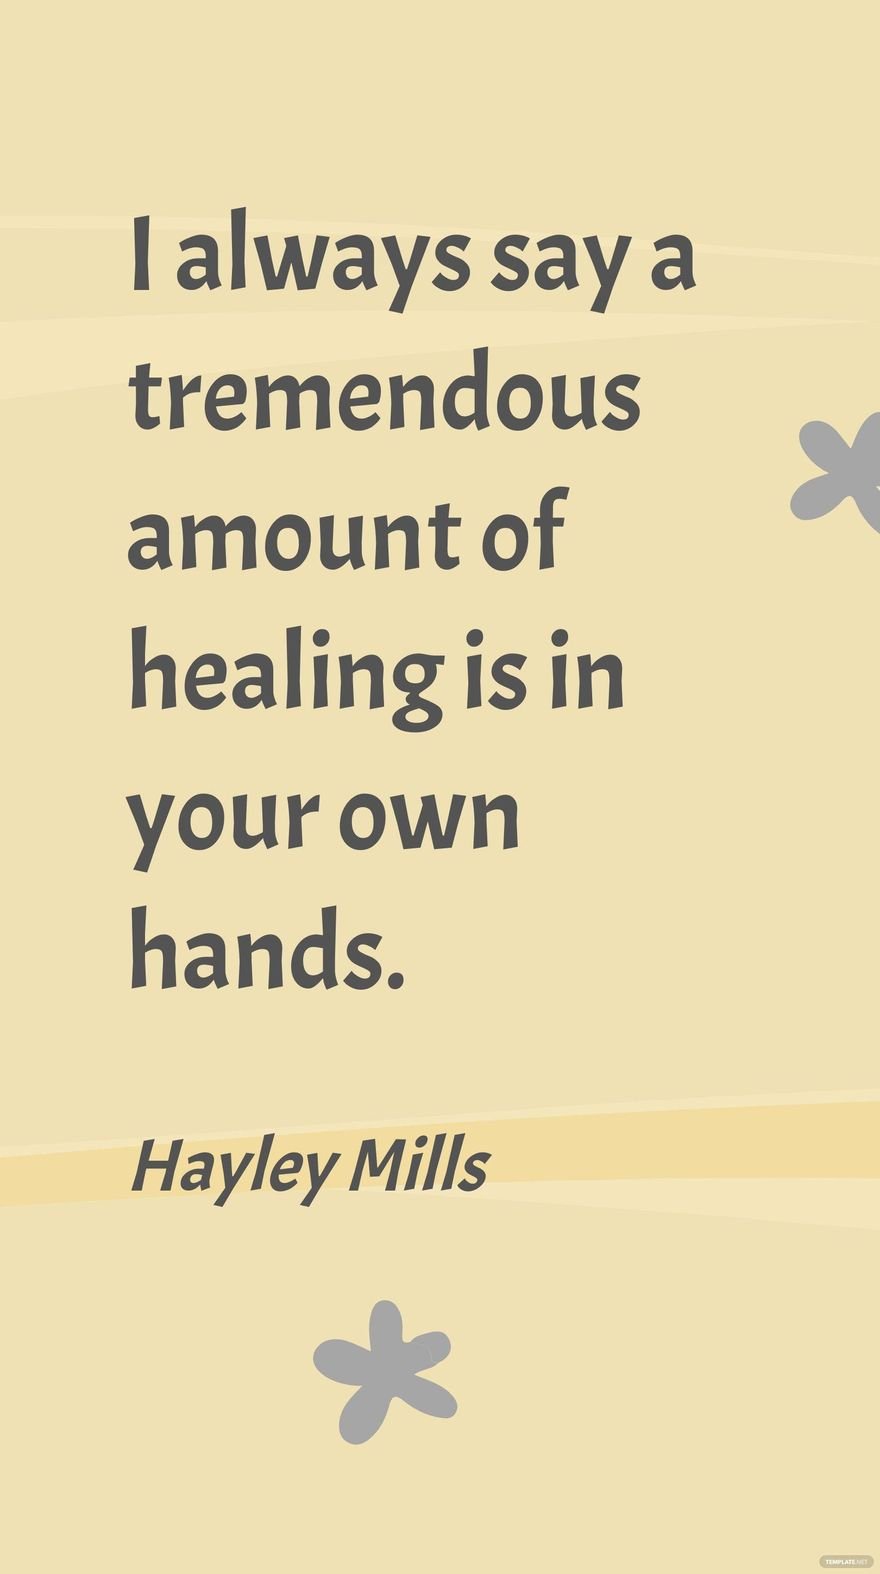 Hayley Mills - I always say a tremendous amount of healing is in your own hands.